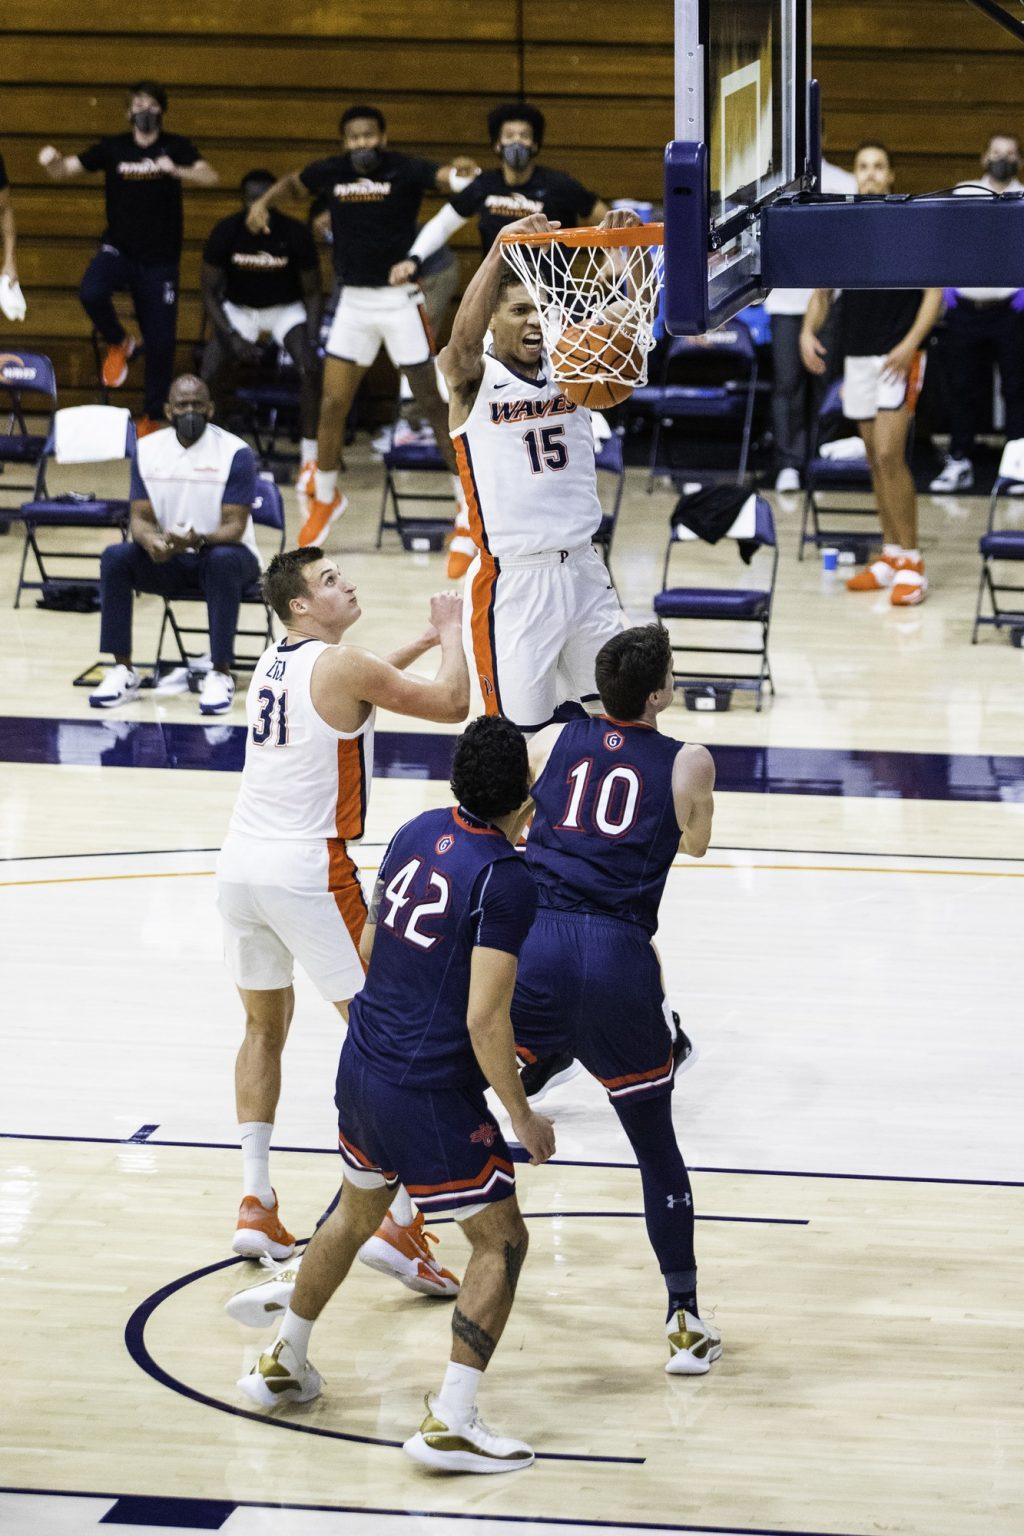 Edwards goes up for a two-handed jam in the second half. Of Pepperdine's 60 total points, 22 of them came from inside the paint.